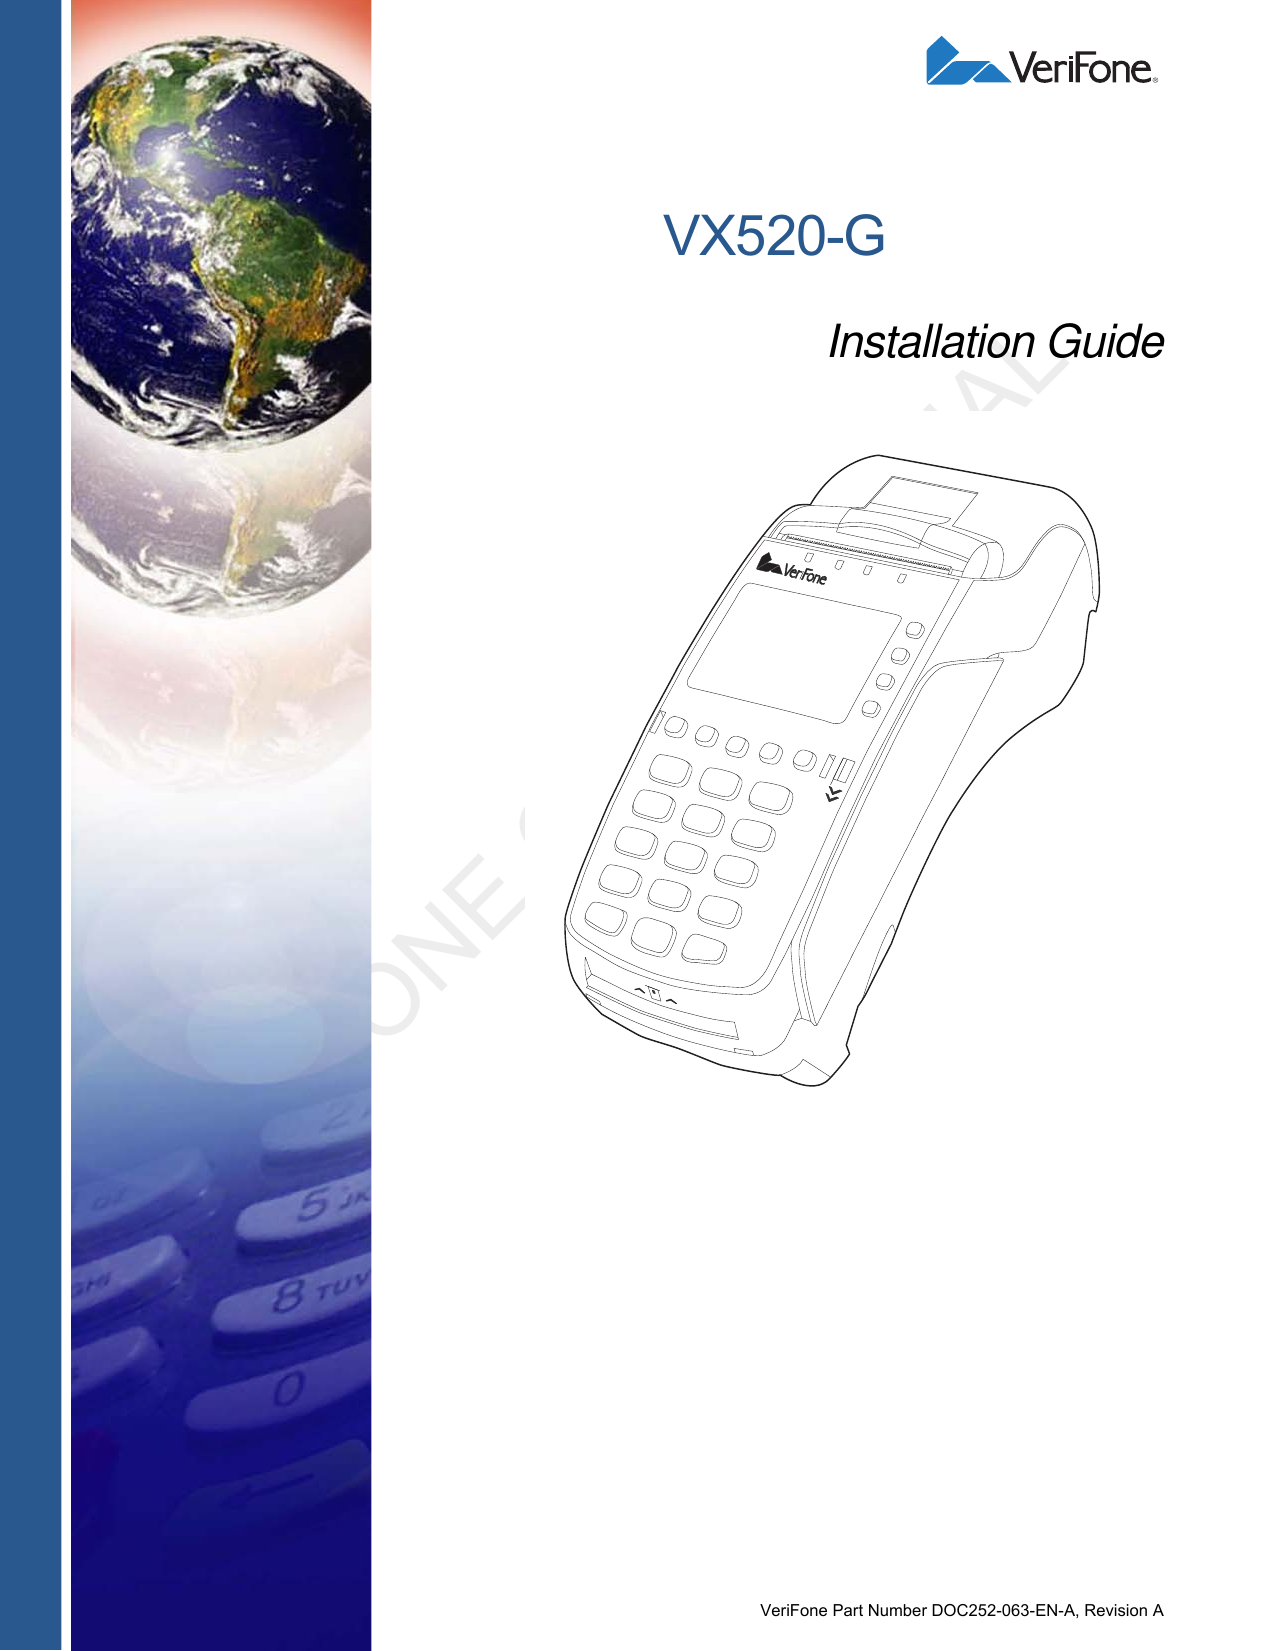 VERIFONE CONFIDENTIAL DRAFTVeriFone Part Number DOC252-063-EN-A, Revision AVX520-GInstallation Guide